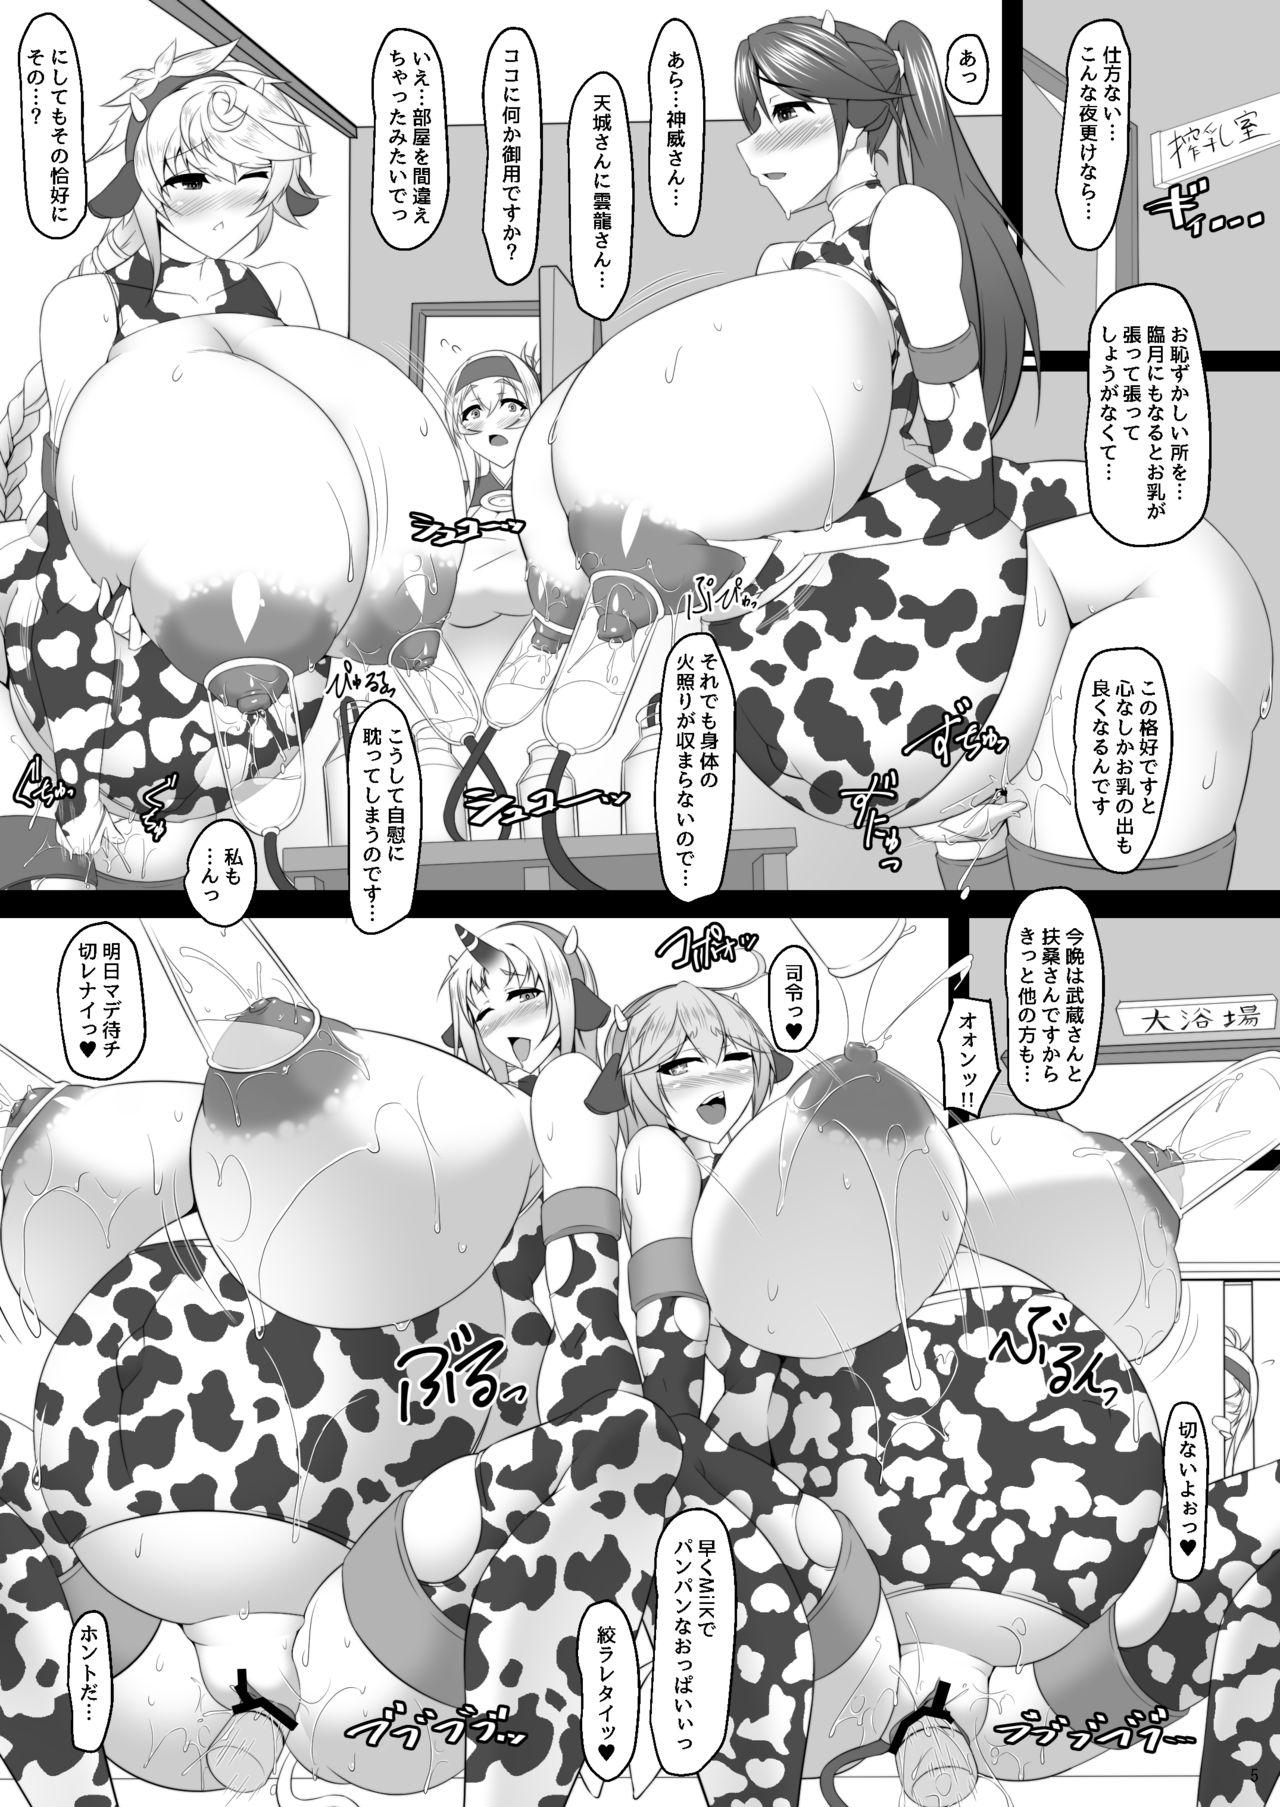 Panocha Bote Colle 6 - Kantai collection Duro - Page 5